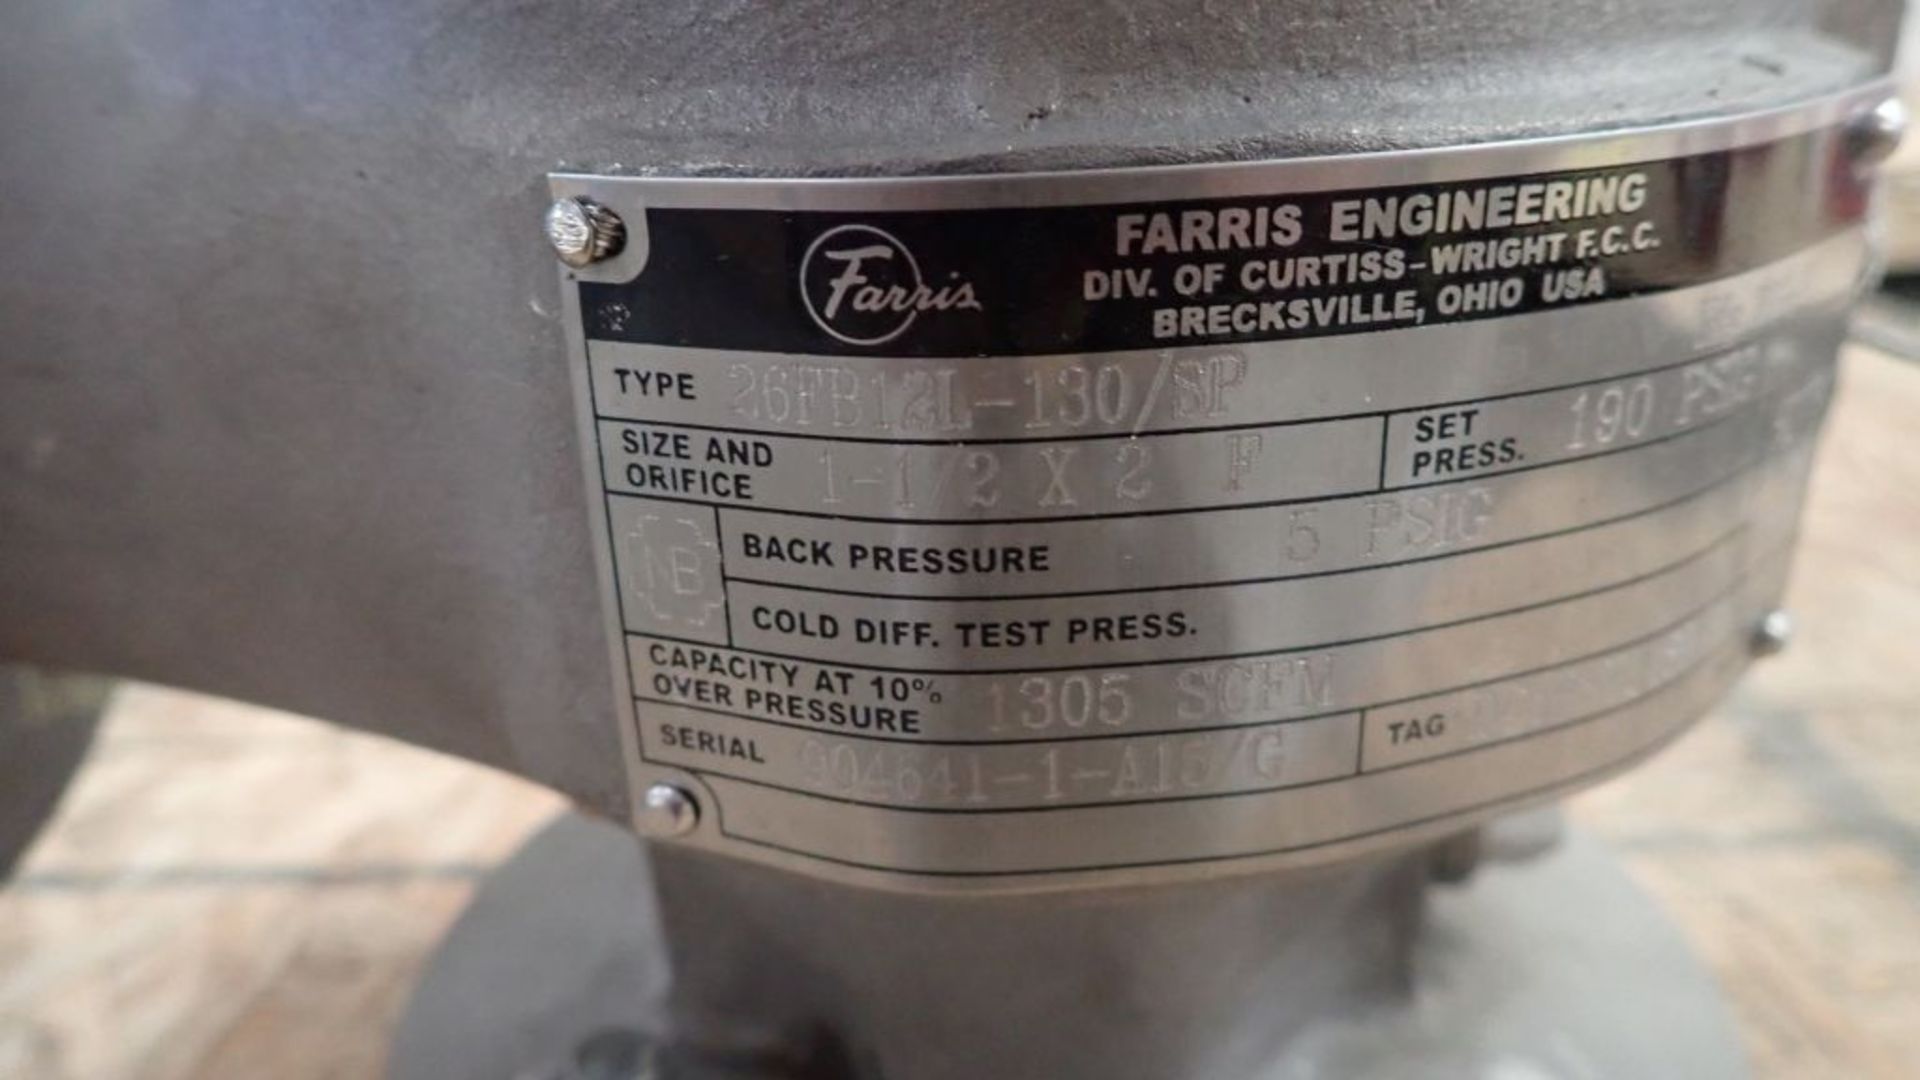 Lot of (1) 1-1/2" Pressure Relief Valve and (1) Terminal Junction Box | (1) Farris 1-1/2" Pressure - Image 3 of 7